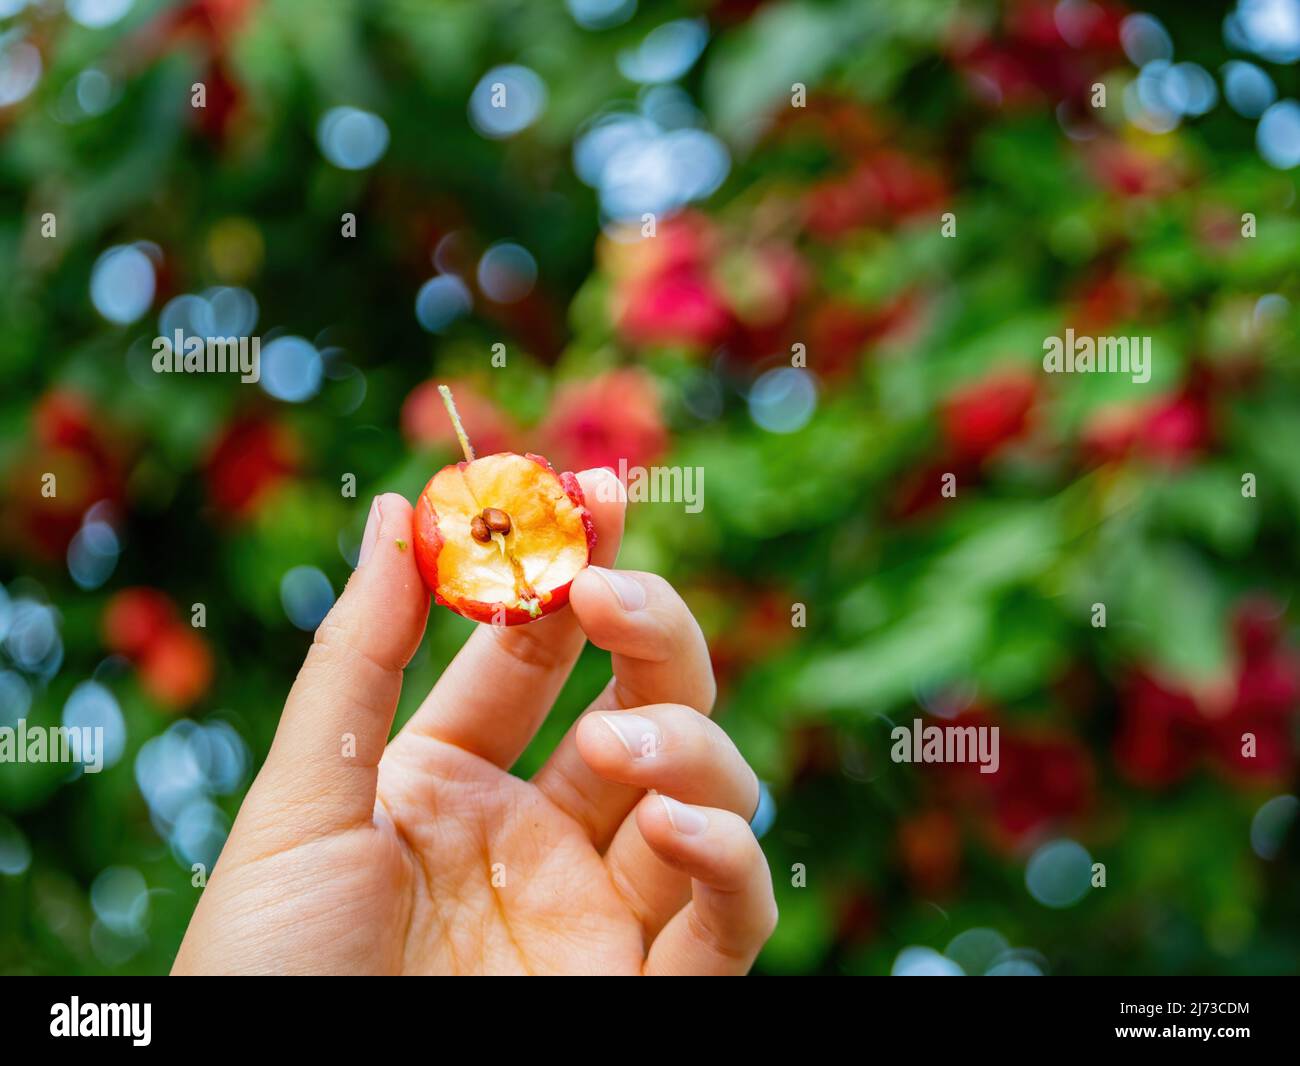 Close up shot of hand holding a bite Malus prunifolia at Colorado Stock Photo